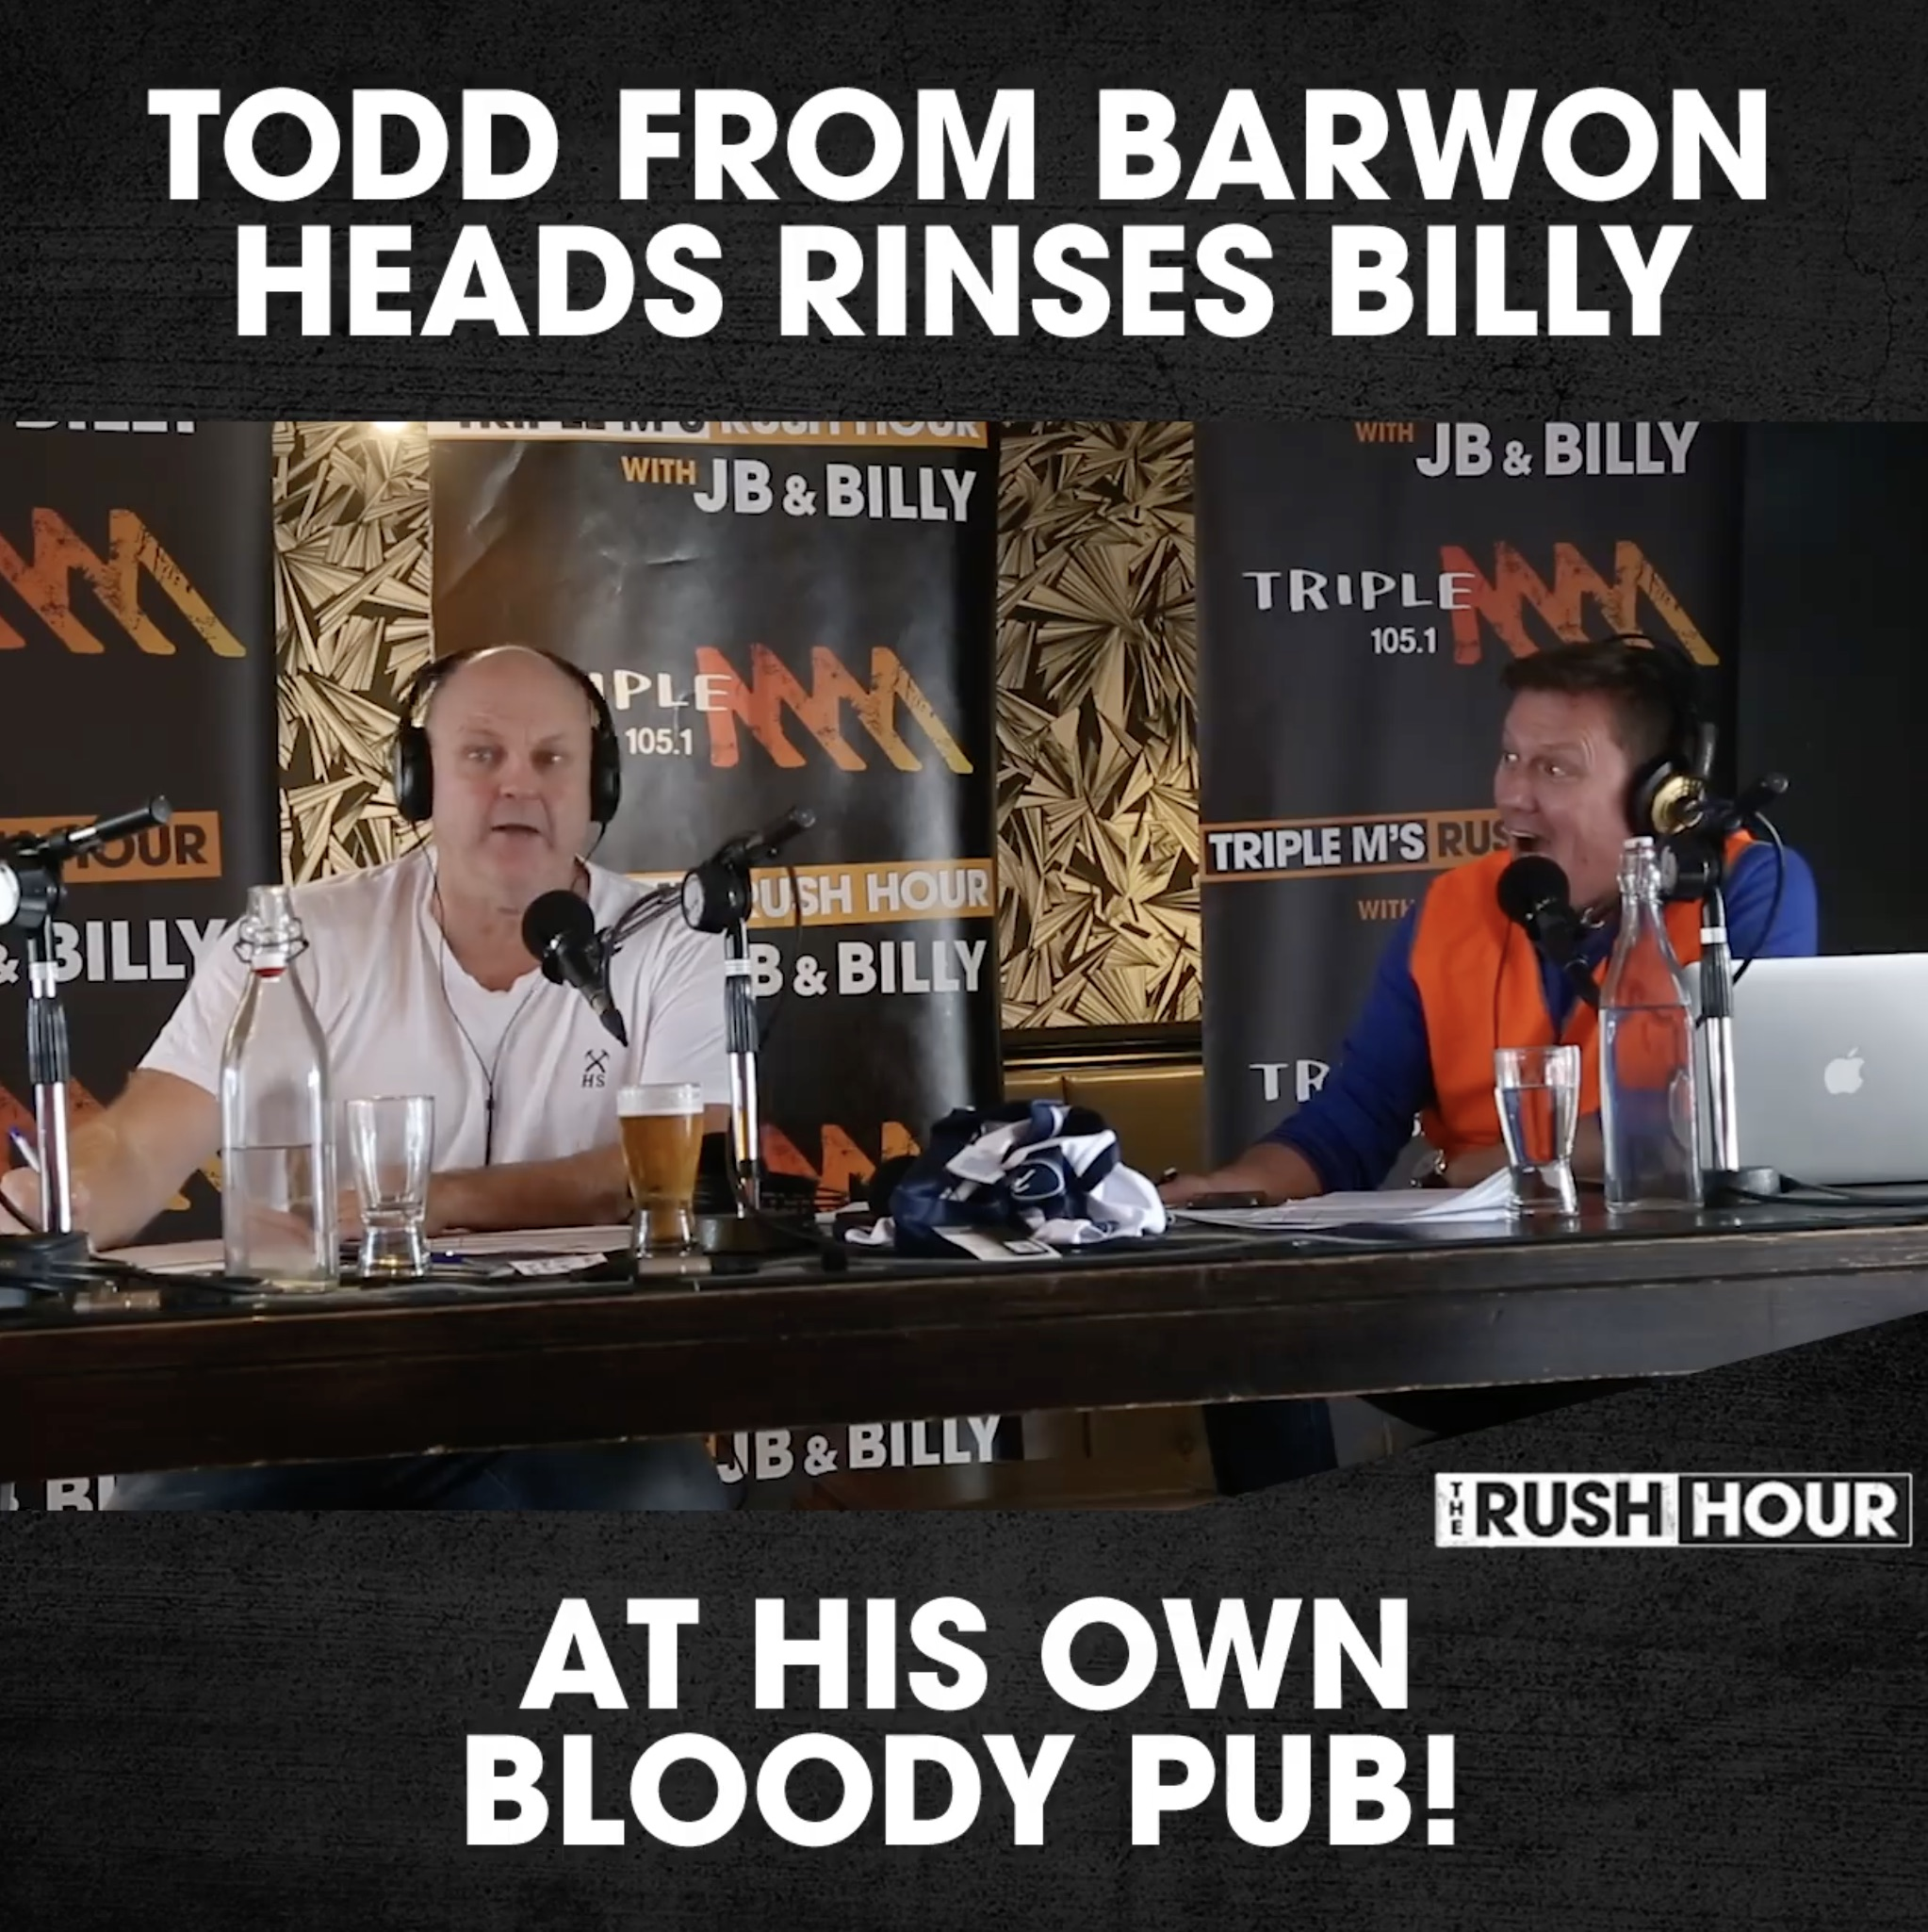 Todd from Barwon Head rinses Billy in his own pub